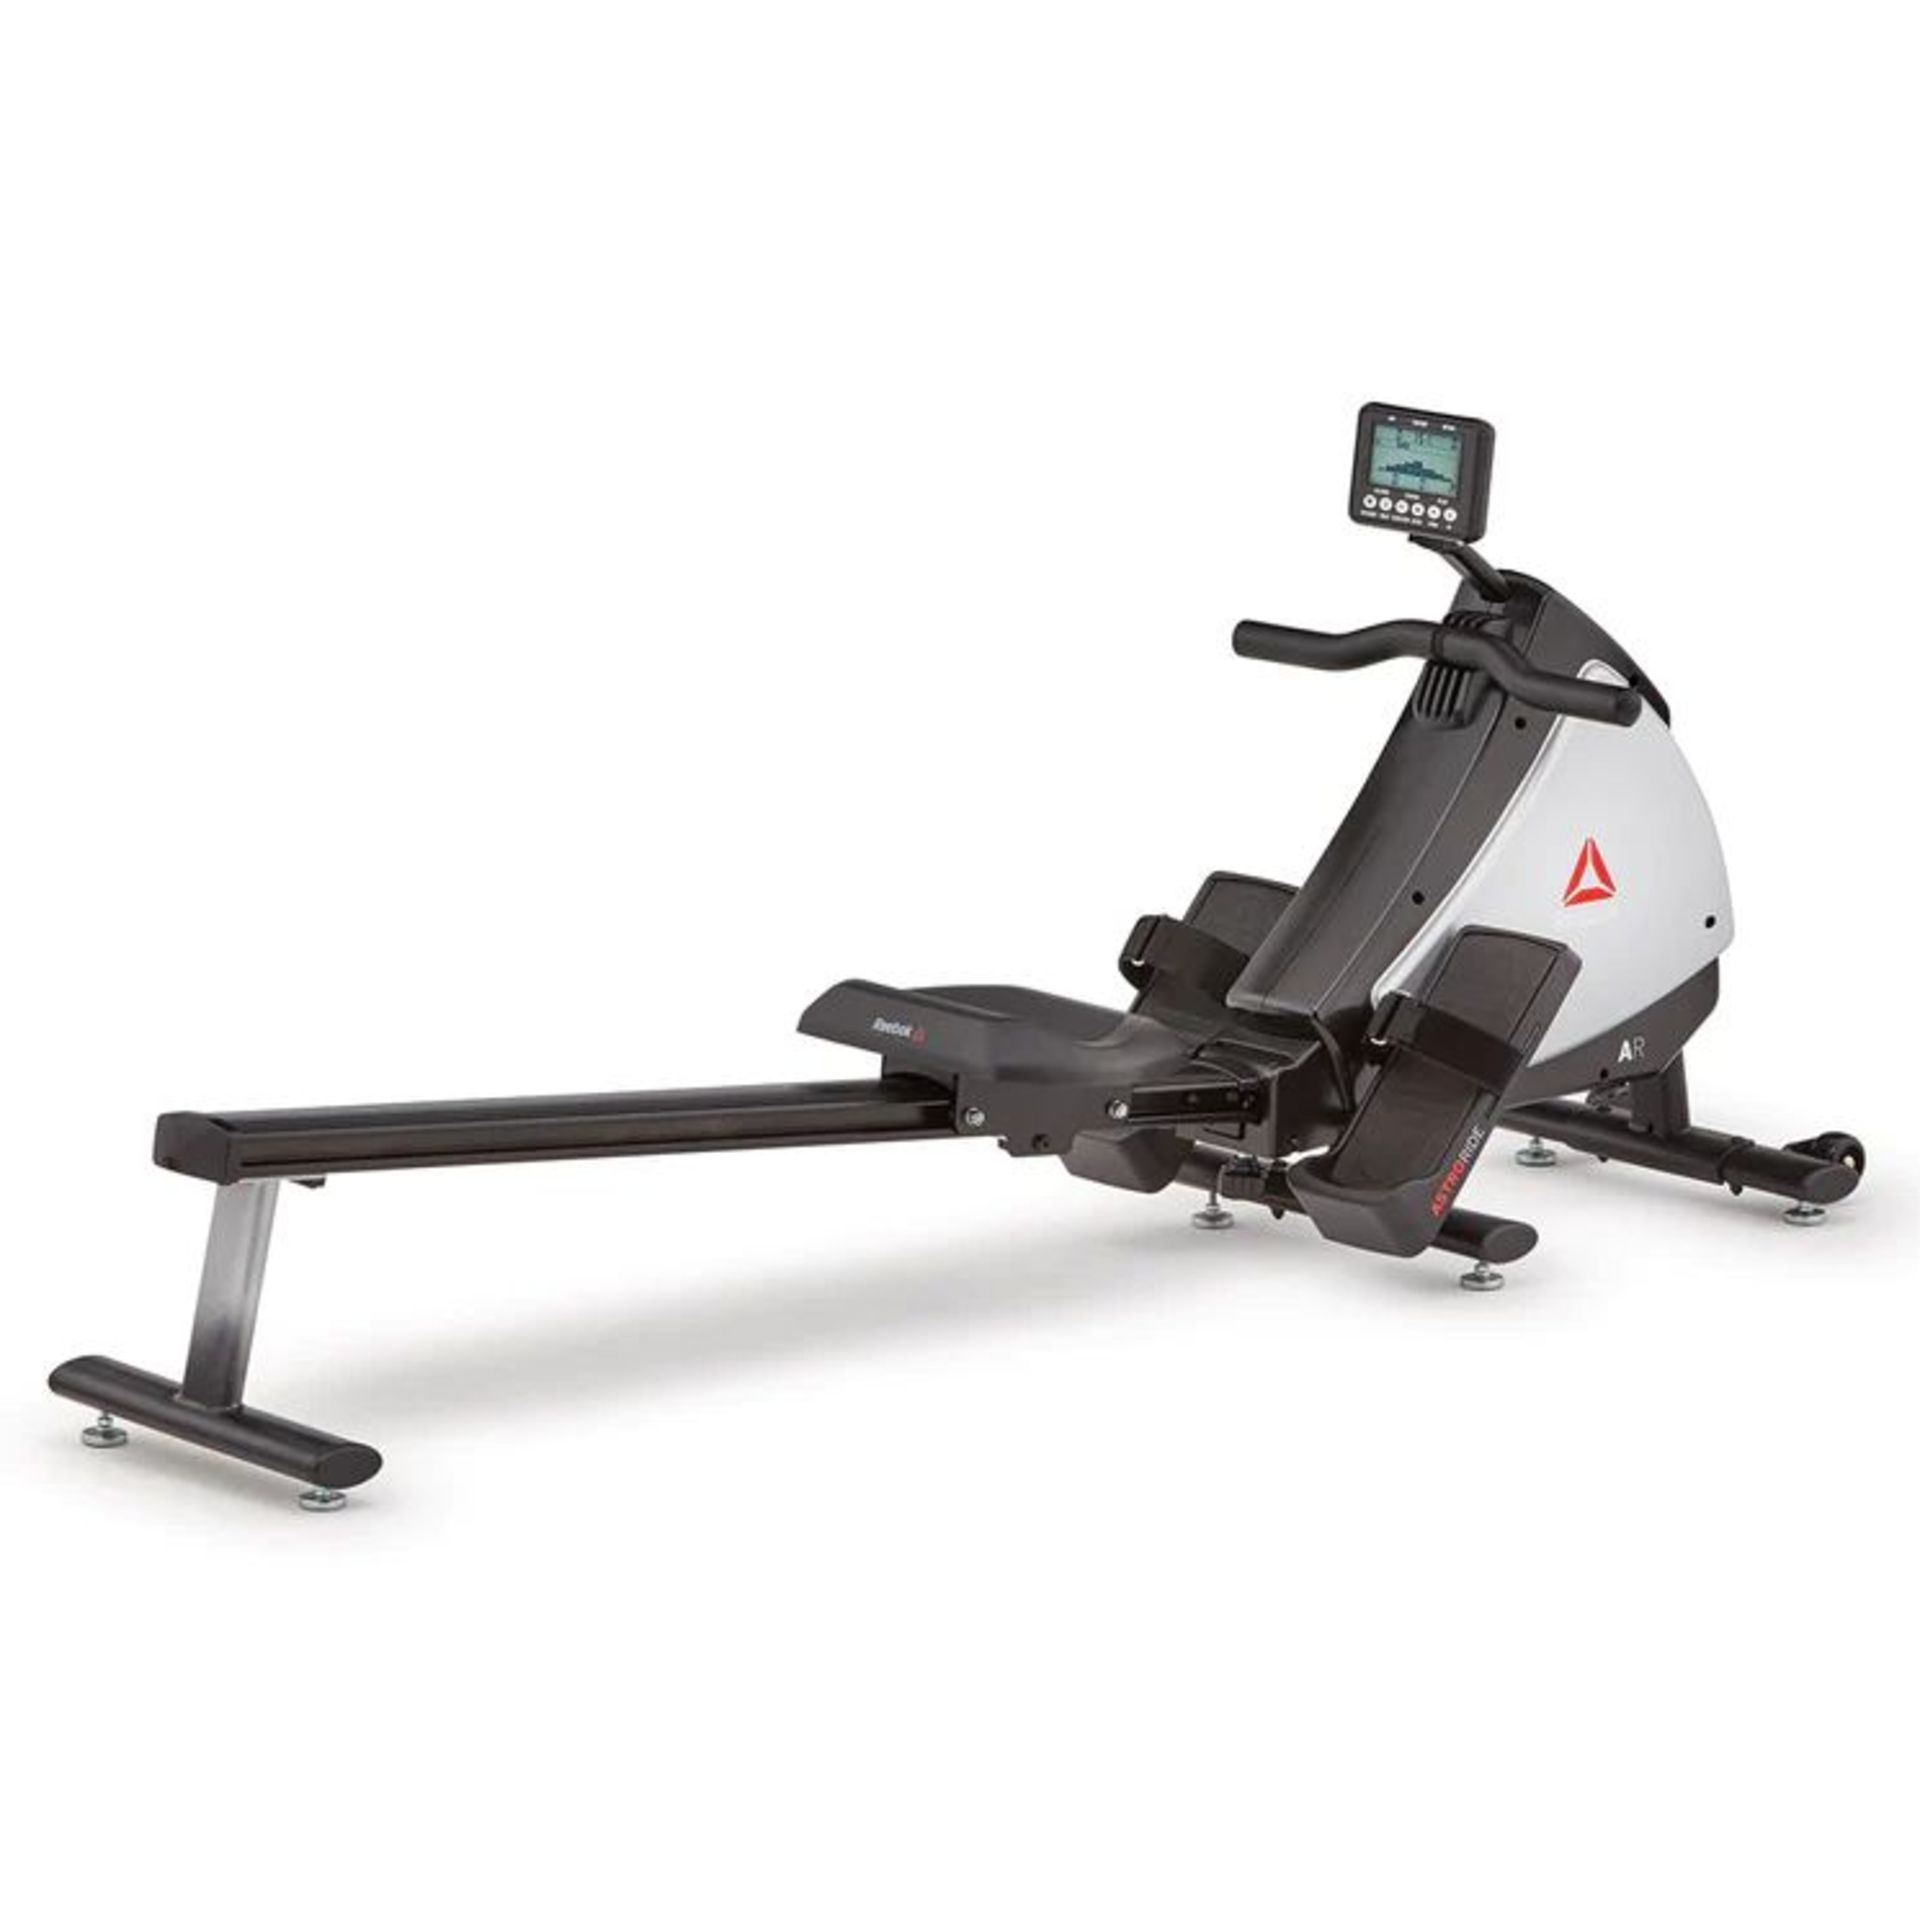 BRAND NEW REEBOK AR Rower. RRP £514.99 EACH R7-6. Designed for you to create more effective and - Image 3 of 4